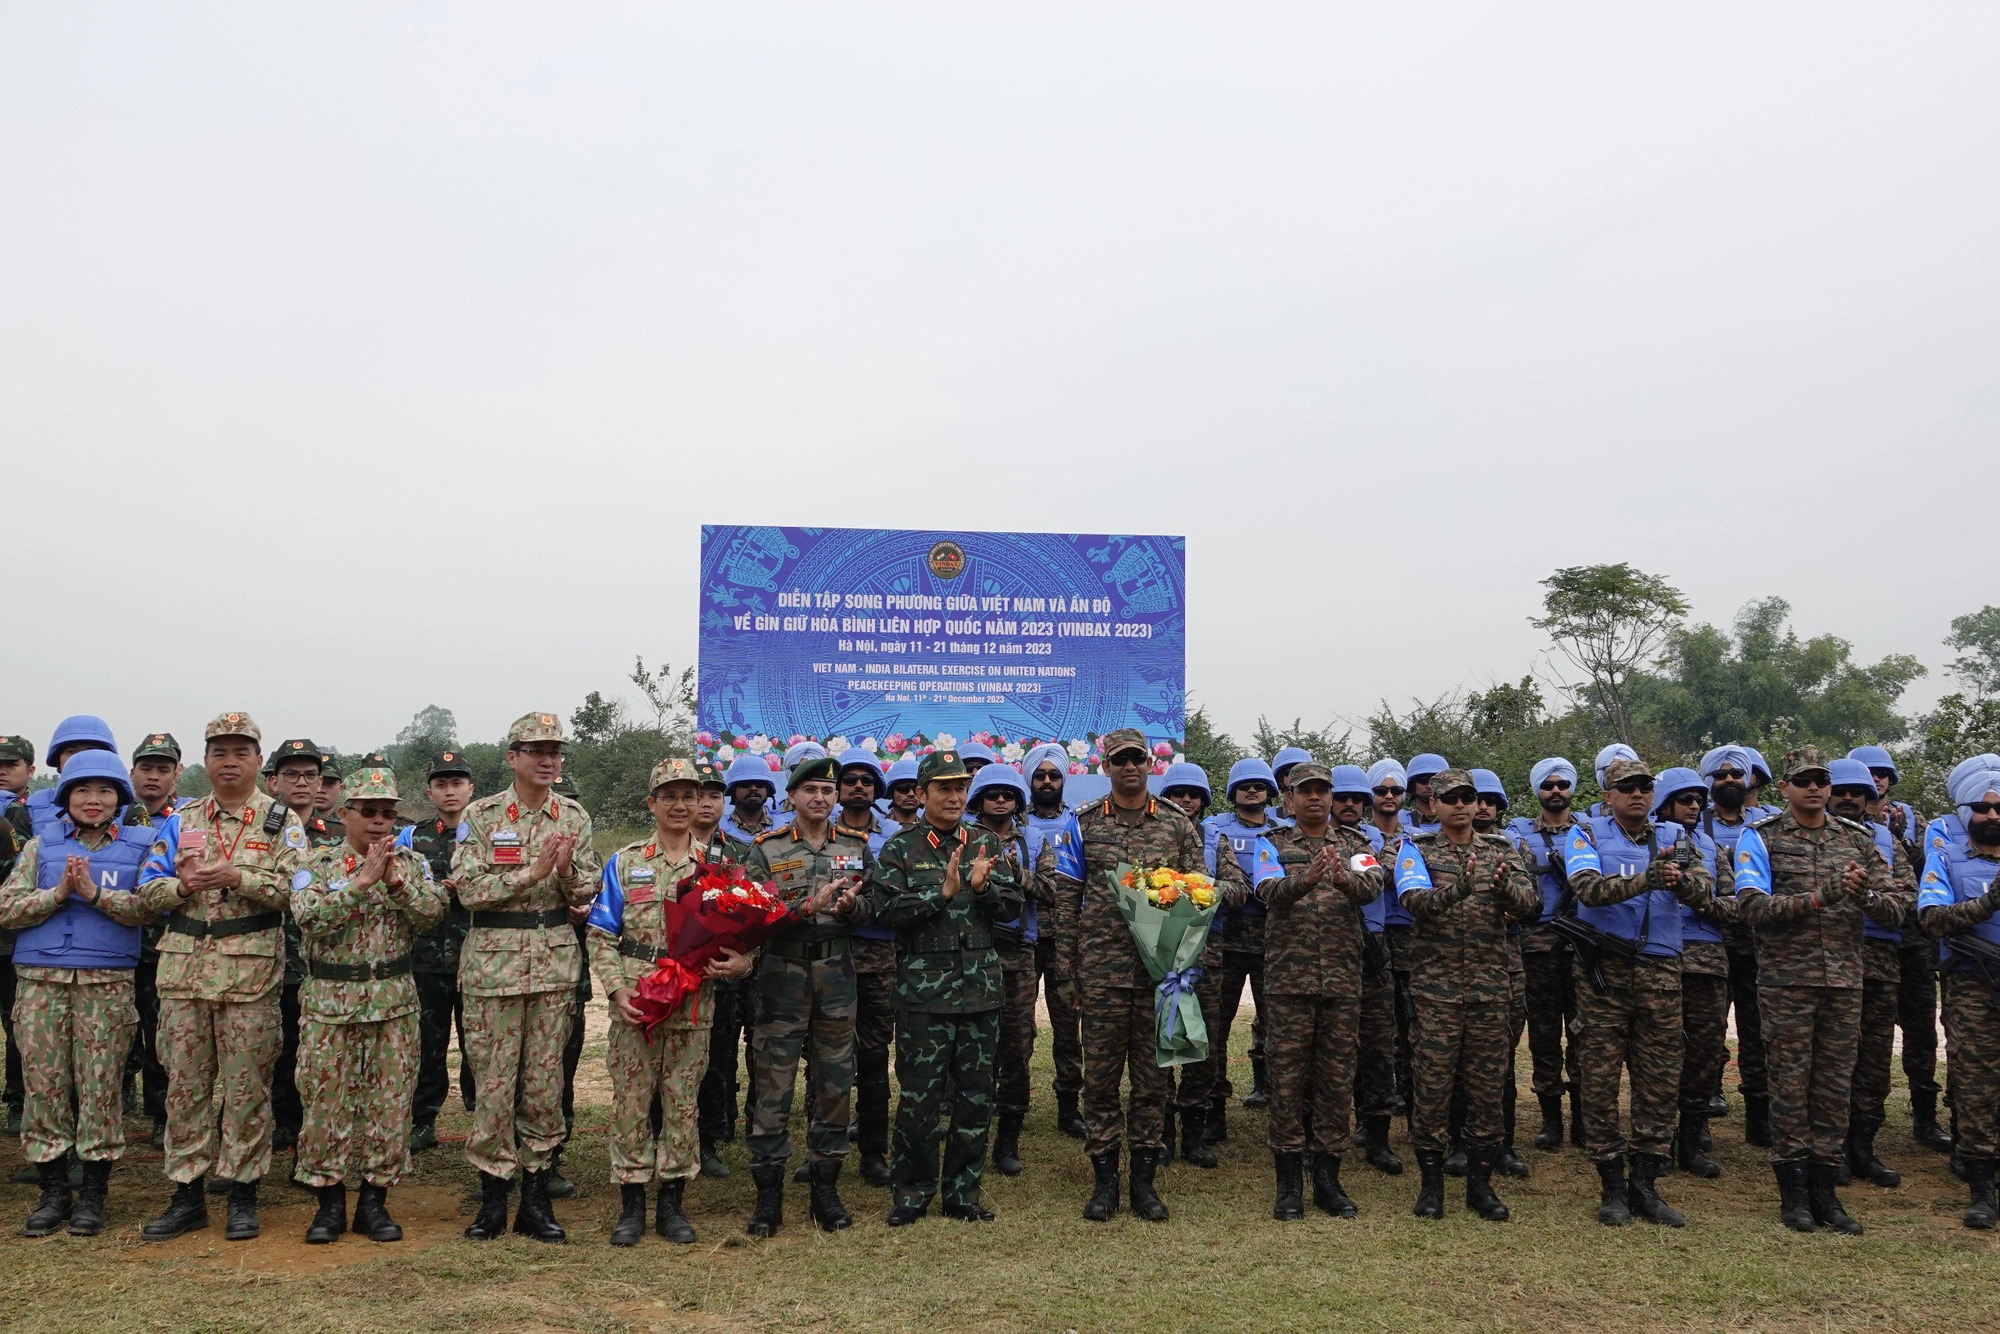 Senior Lieutenant General Phung Si Tan, Deputy Chief of the General Staff of the Vietnam People's Army, presents flower bouquets to peacekeepers participating in the field exercise, Hanoi, December 18, 2023. Photo: Thuy Du / Tuoi Tre